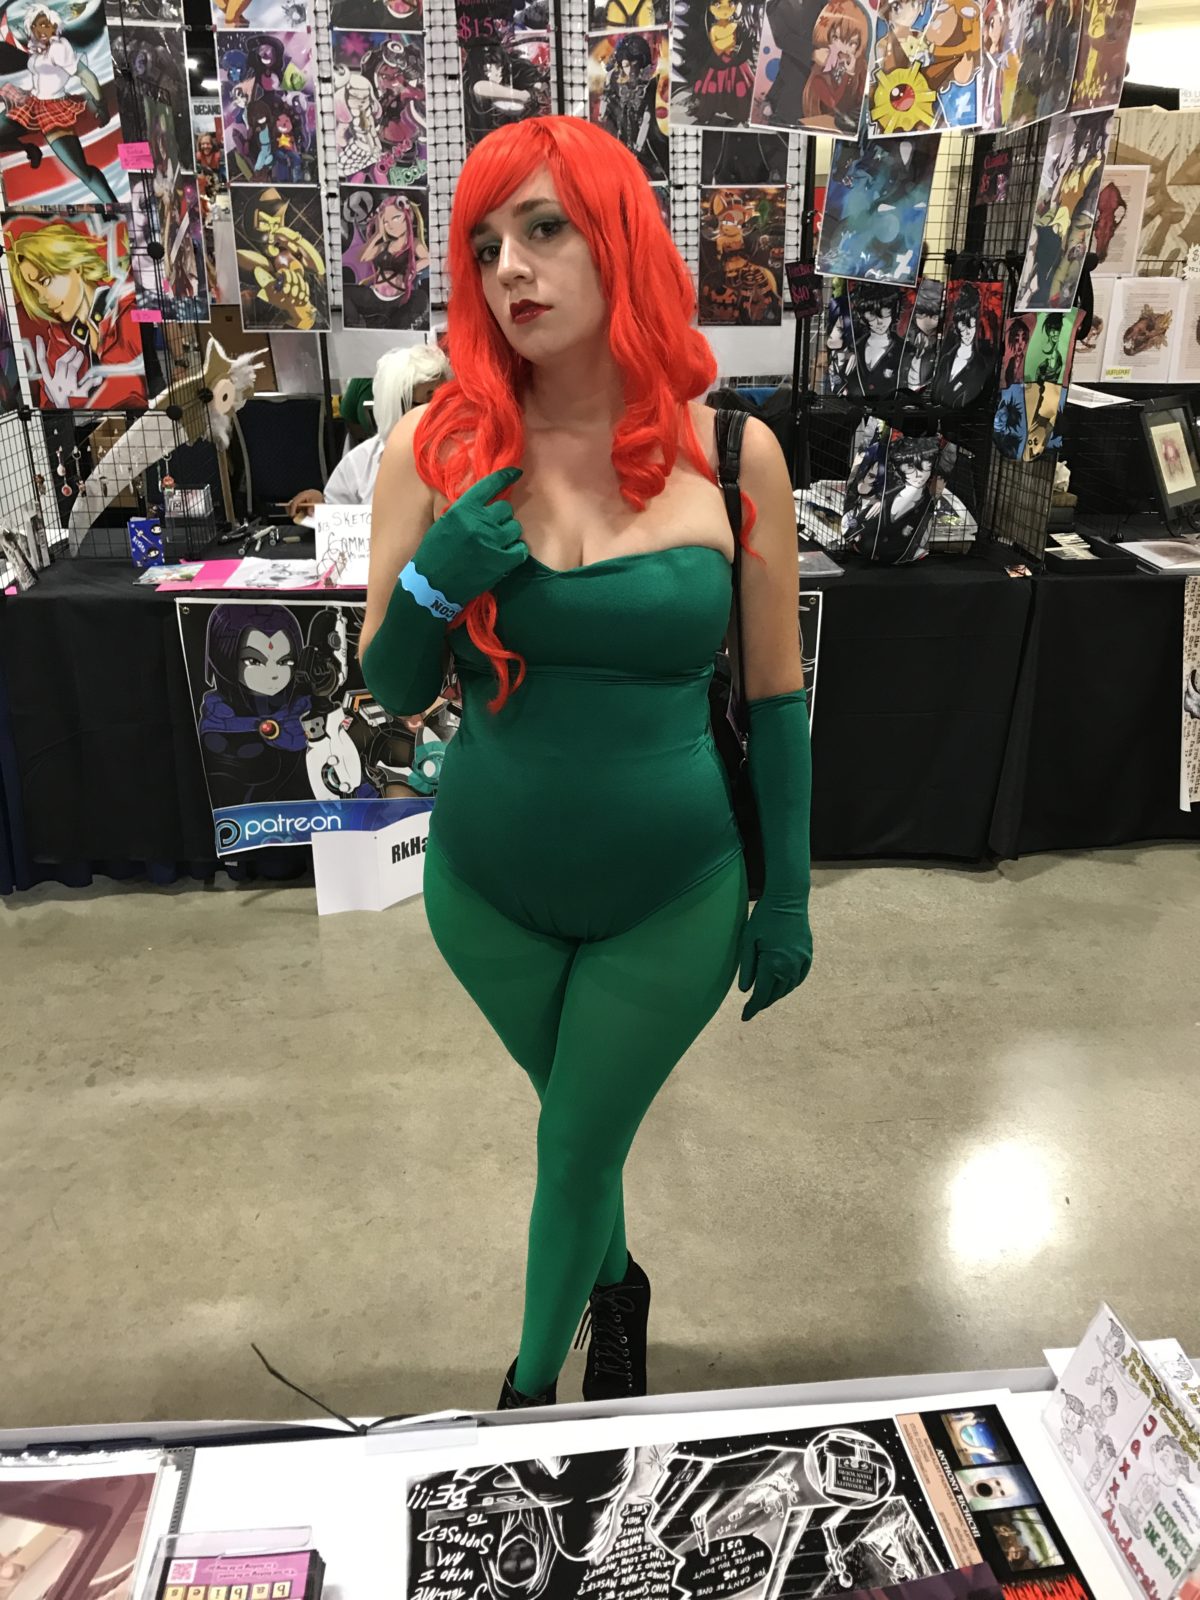 SUPER CosViews from Fort Lauderdale SUPERCON:  IVY came to plant roots at SUPERCON